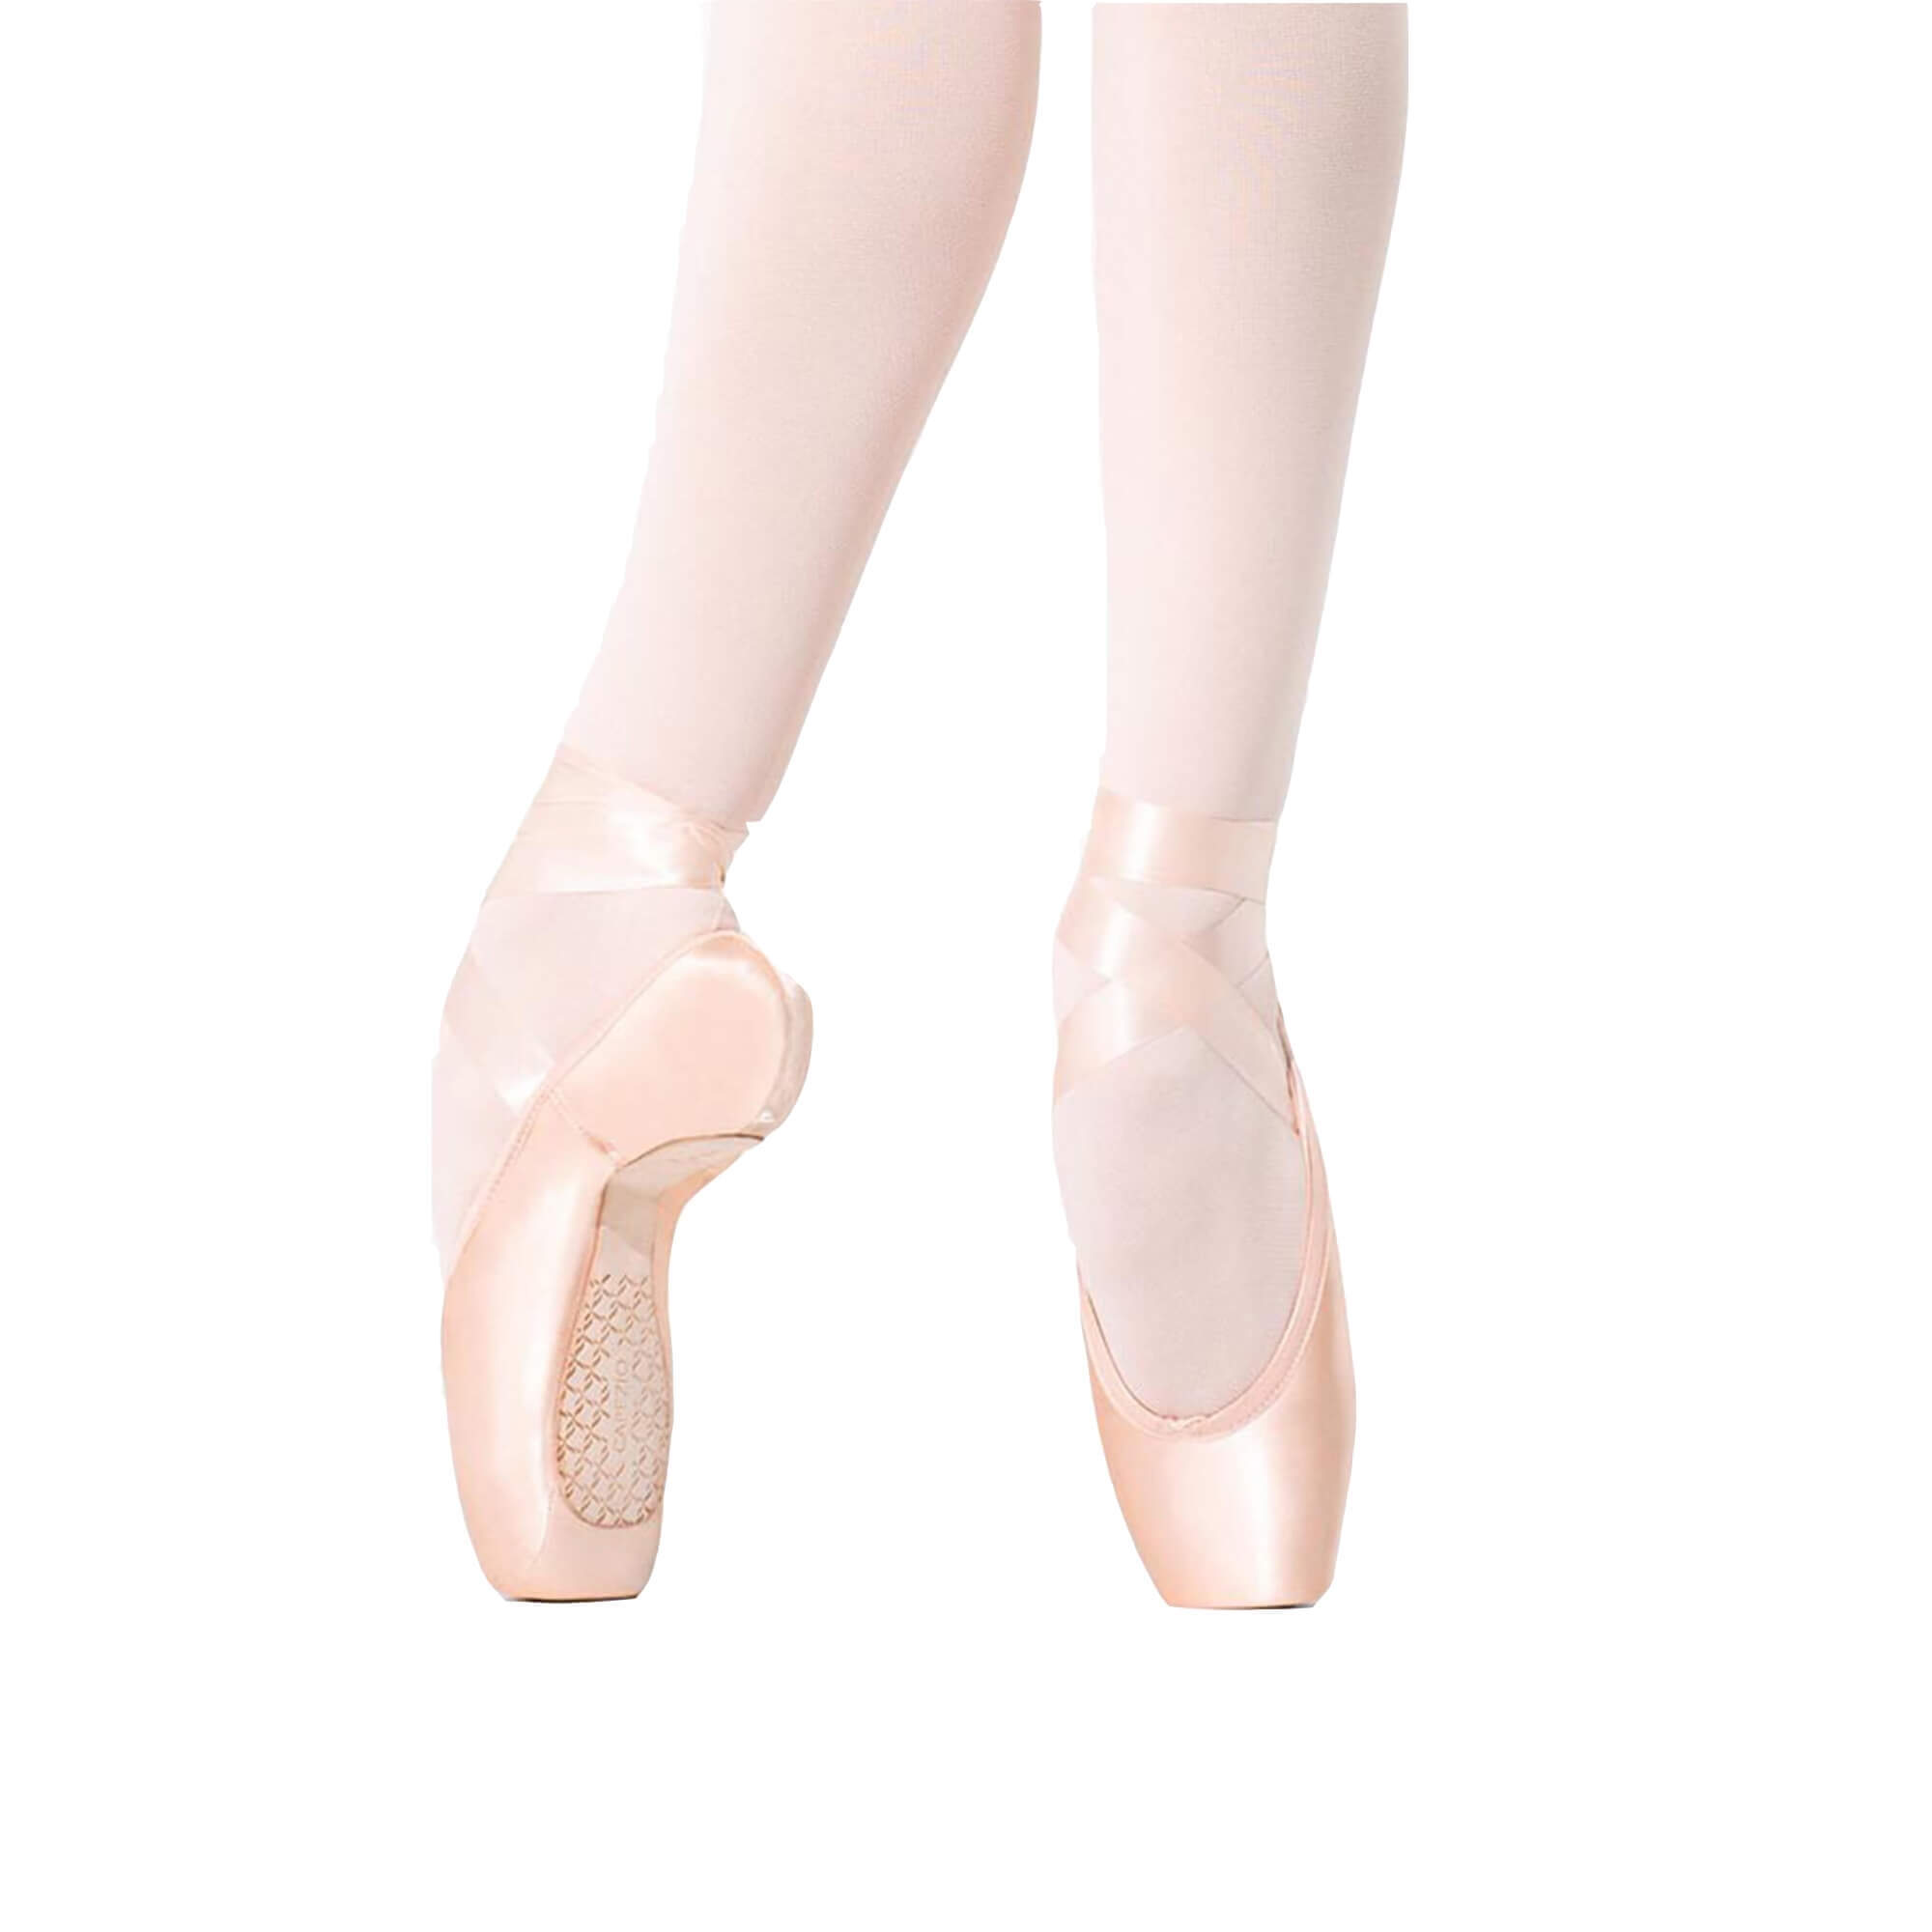 places to buy pointe shoes near me